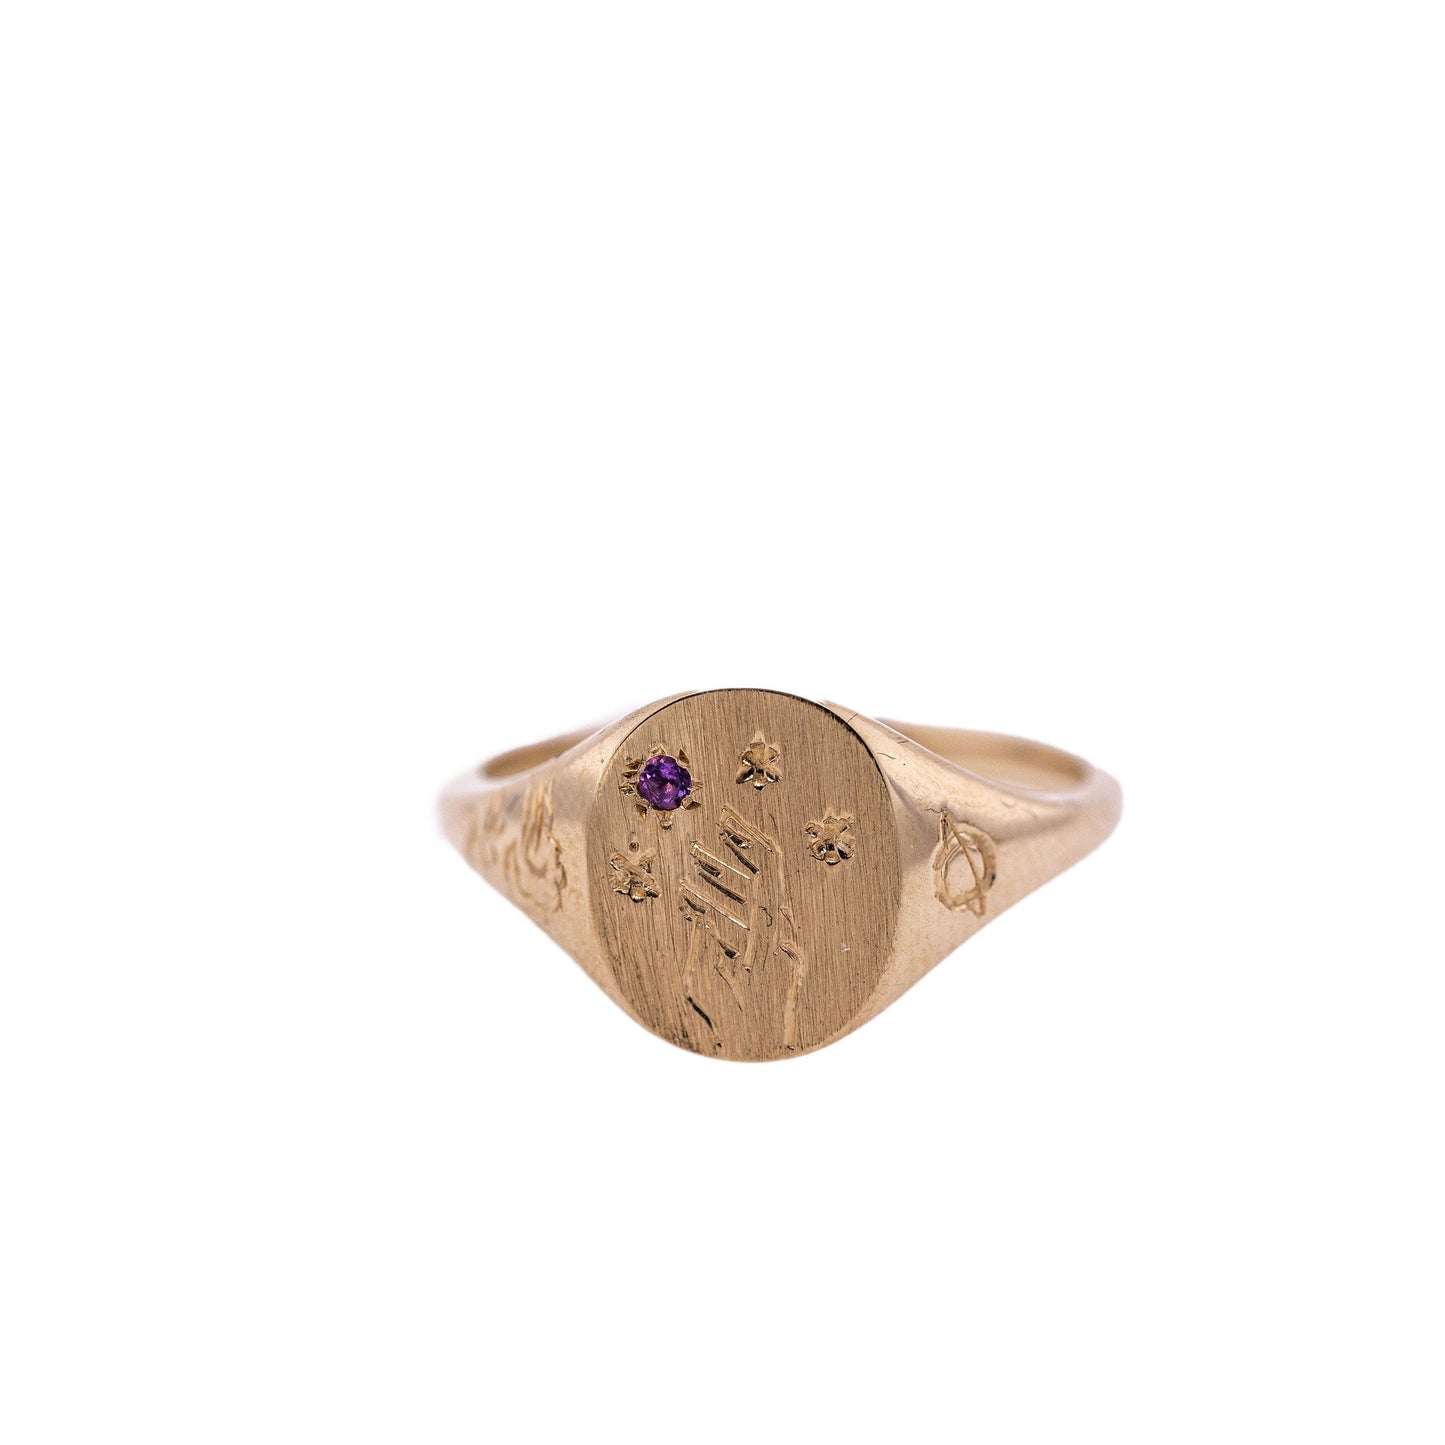 Amethyst Hand-engraved gold signet ring with intricate design on a clean white background